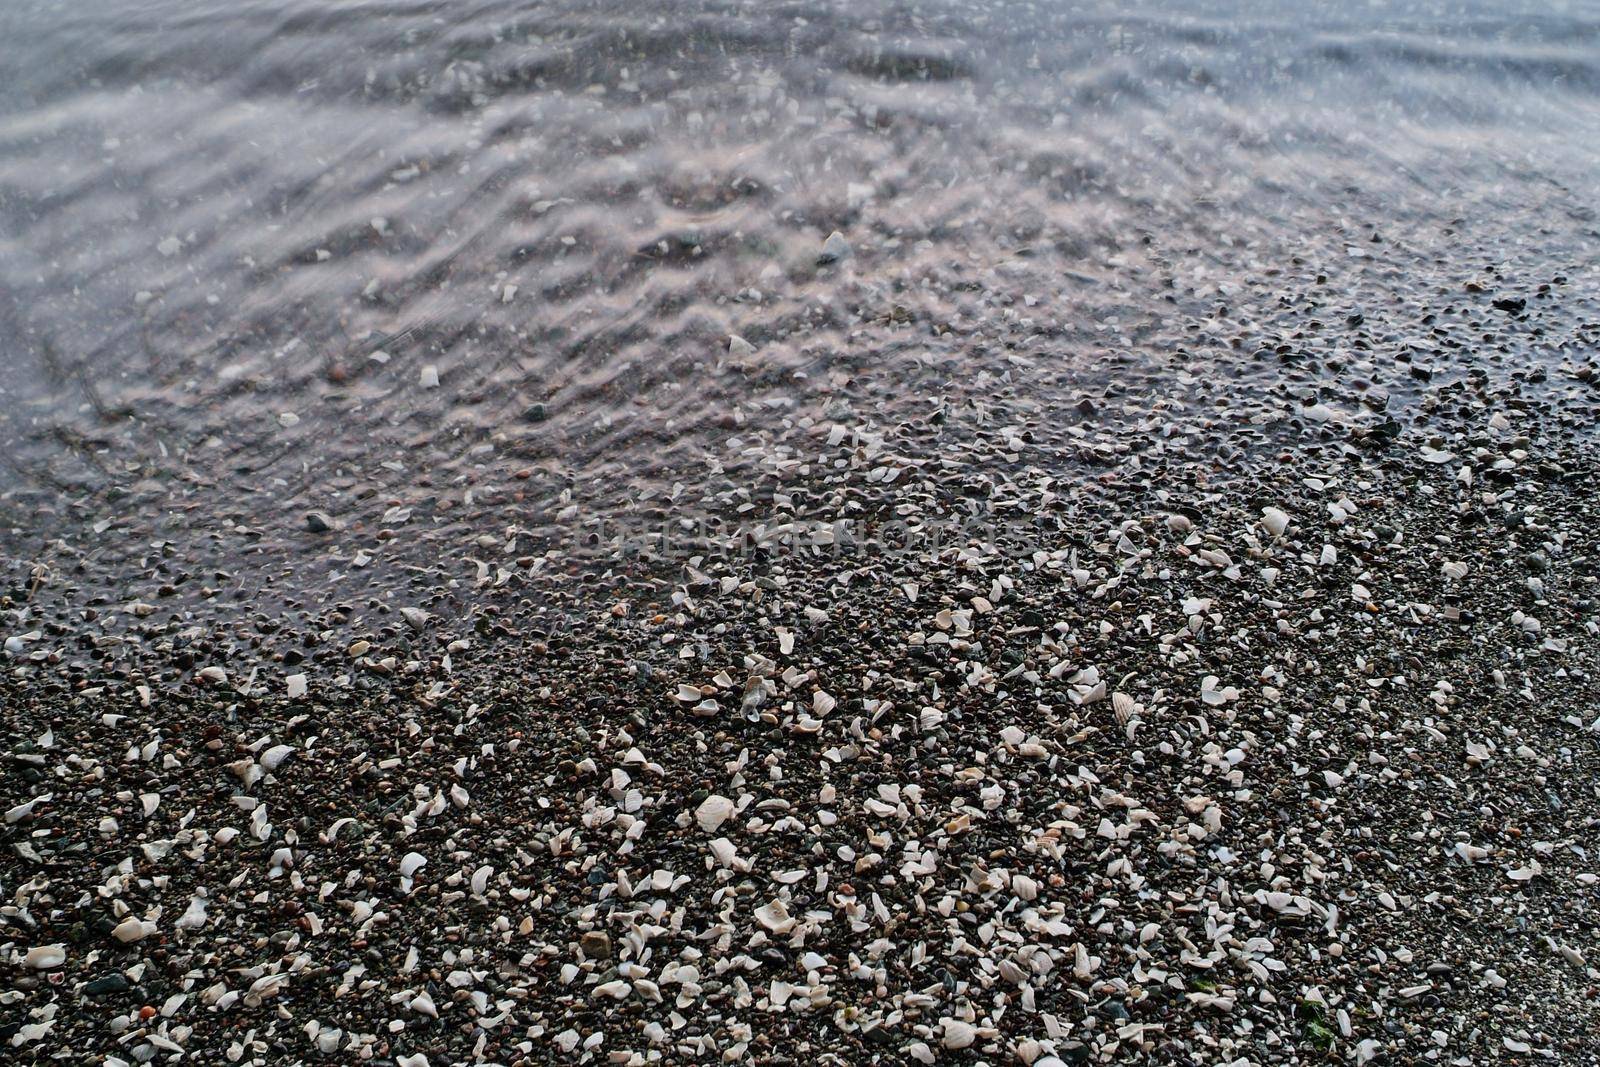 Ocean Water Meeting Pebbled Beach BAckground Texture from Ruckle Park on Salt Spring Island by markvandam